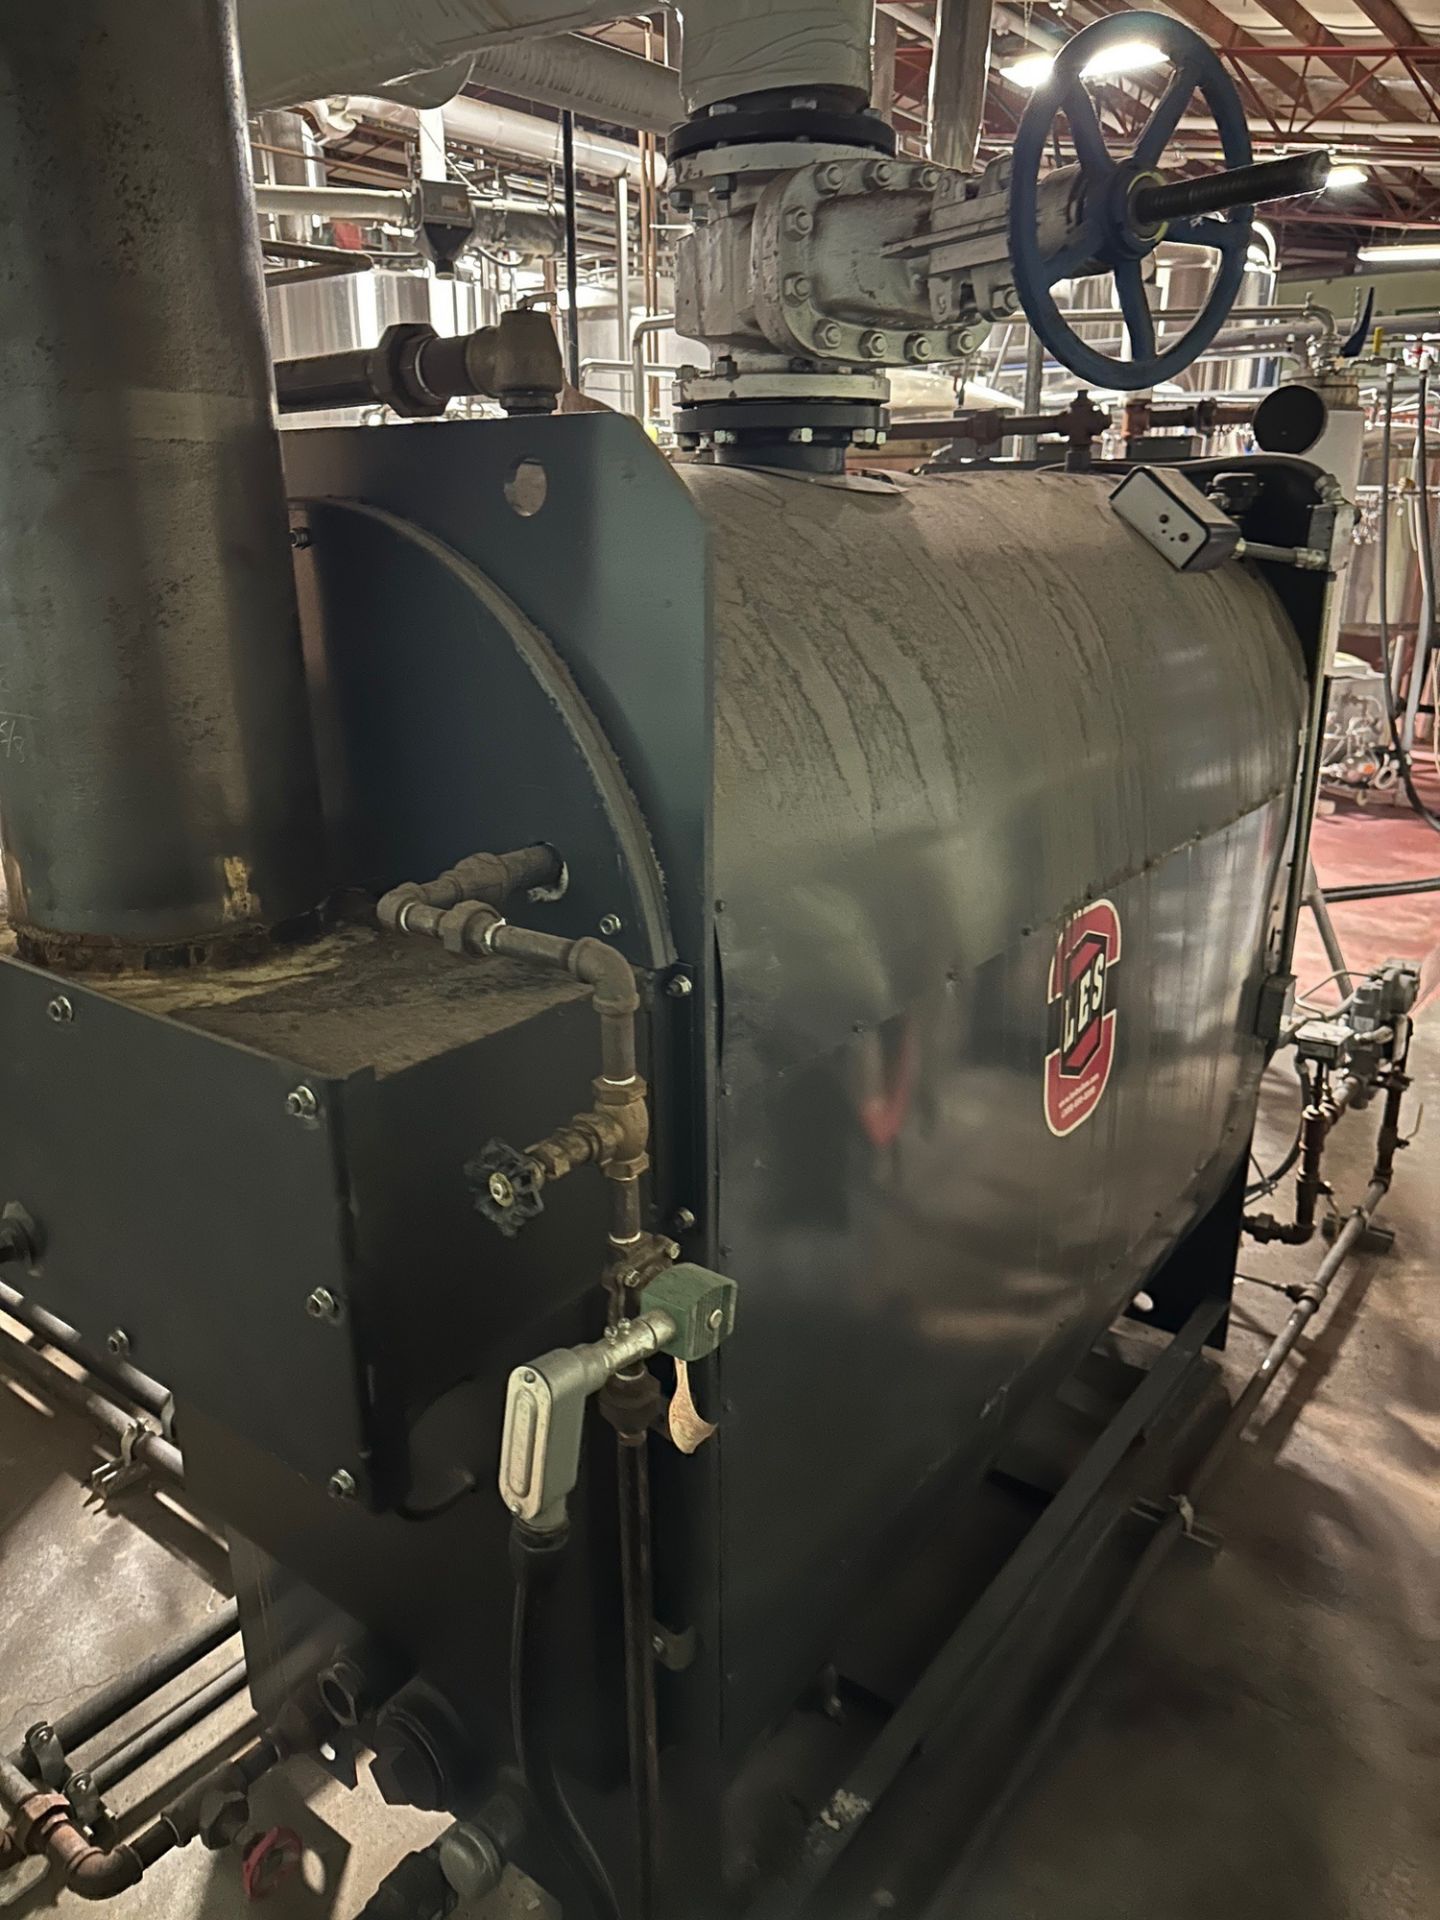 LES Low Pressure Steam Boiler with Water Treatment System | Rig Fee $1500 - Image 3 of 10